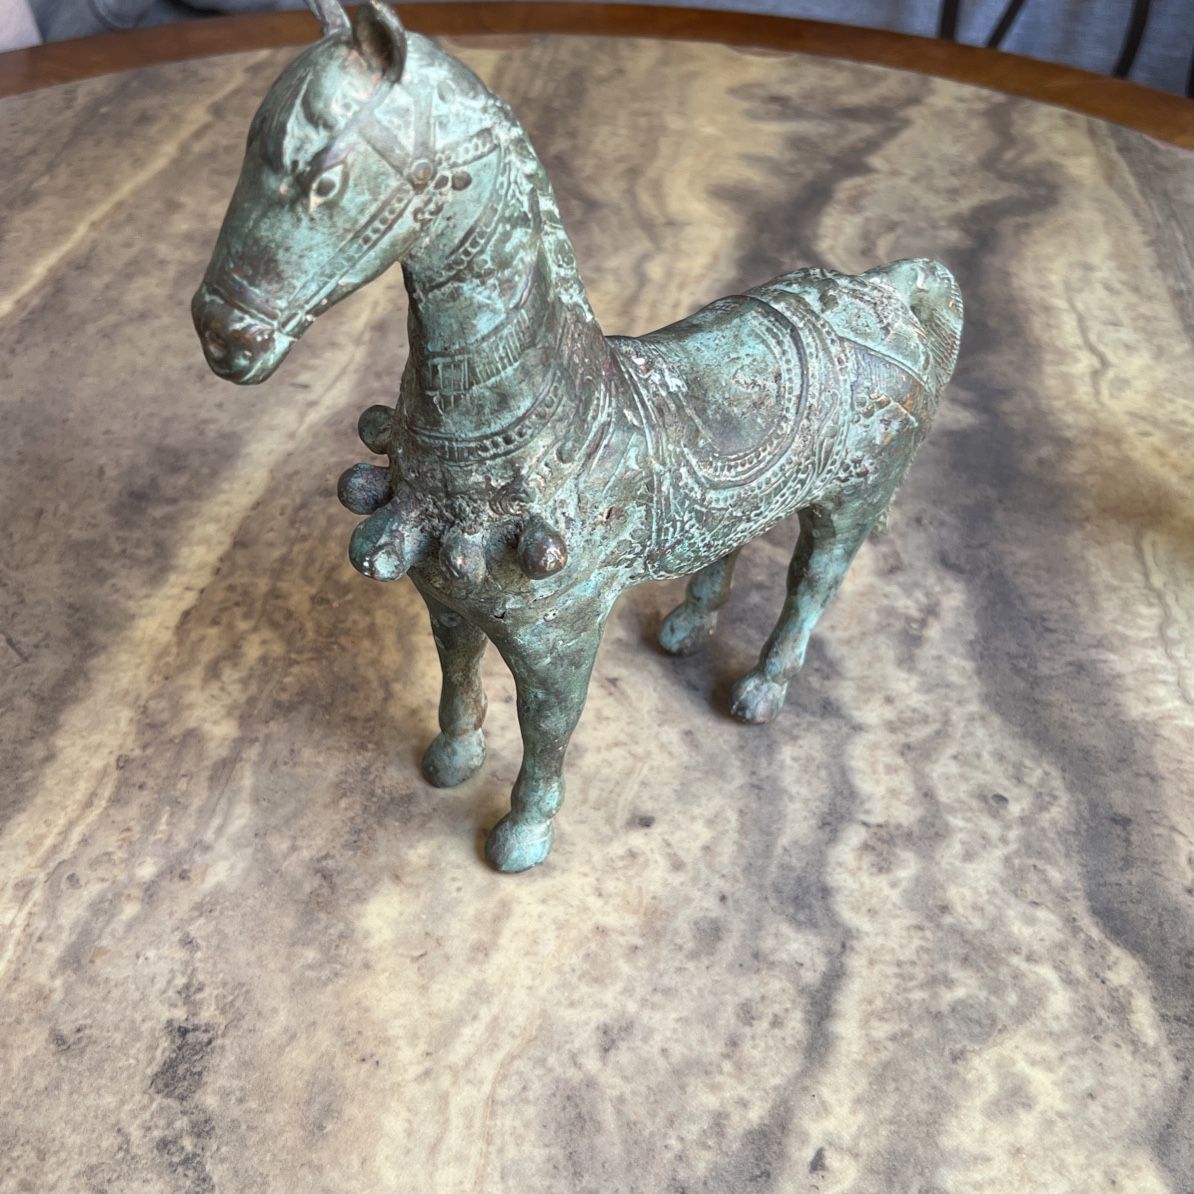   Antique Chinese han dynasty bronze war horse. Hight:10 in  Length: 9 in